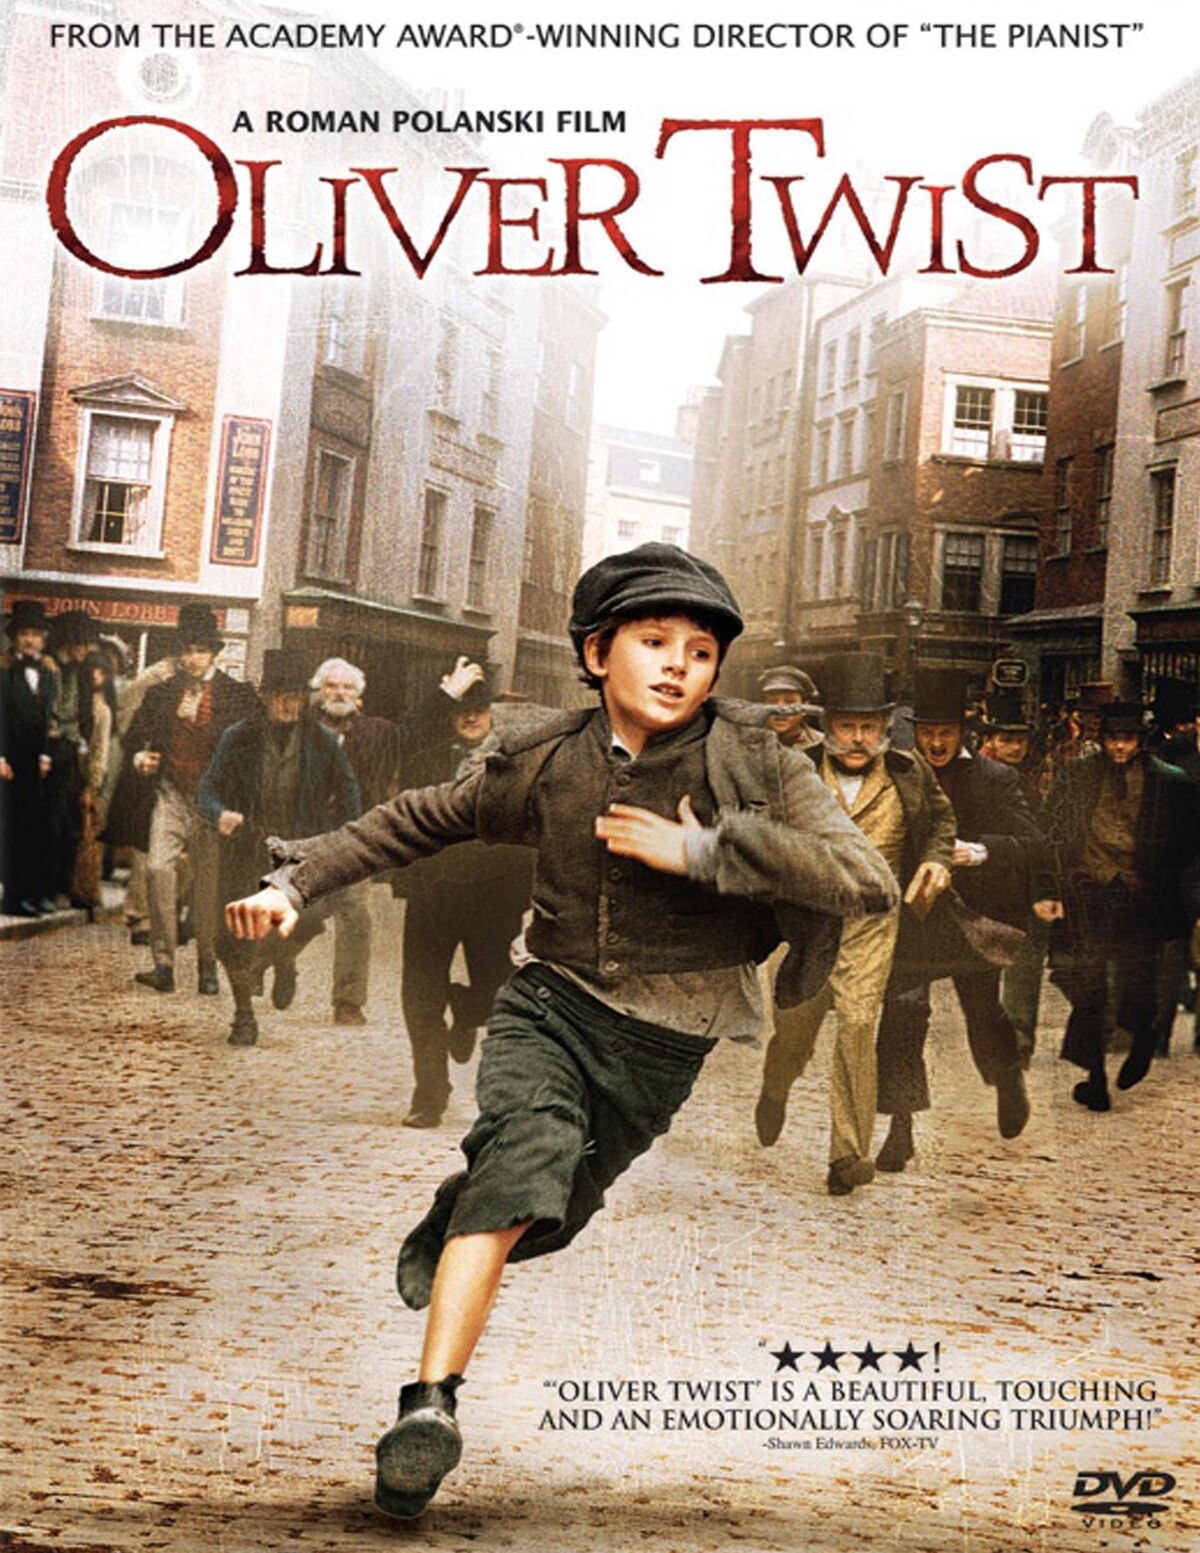 Oliver Twist (Character), Oliver Twist-Charles Dickens Wiki